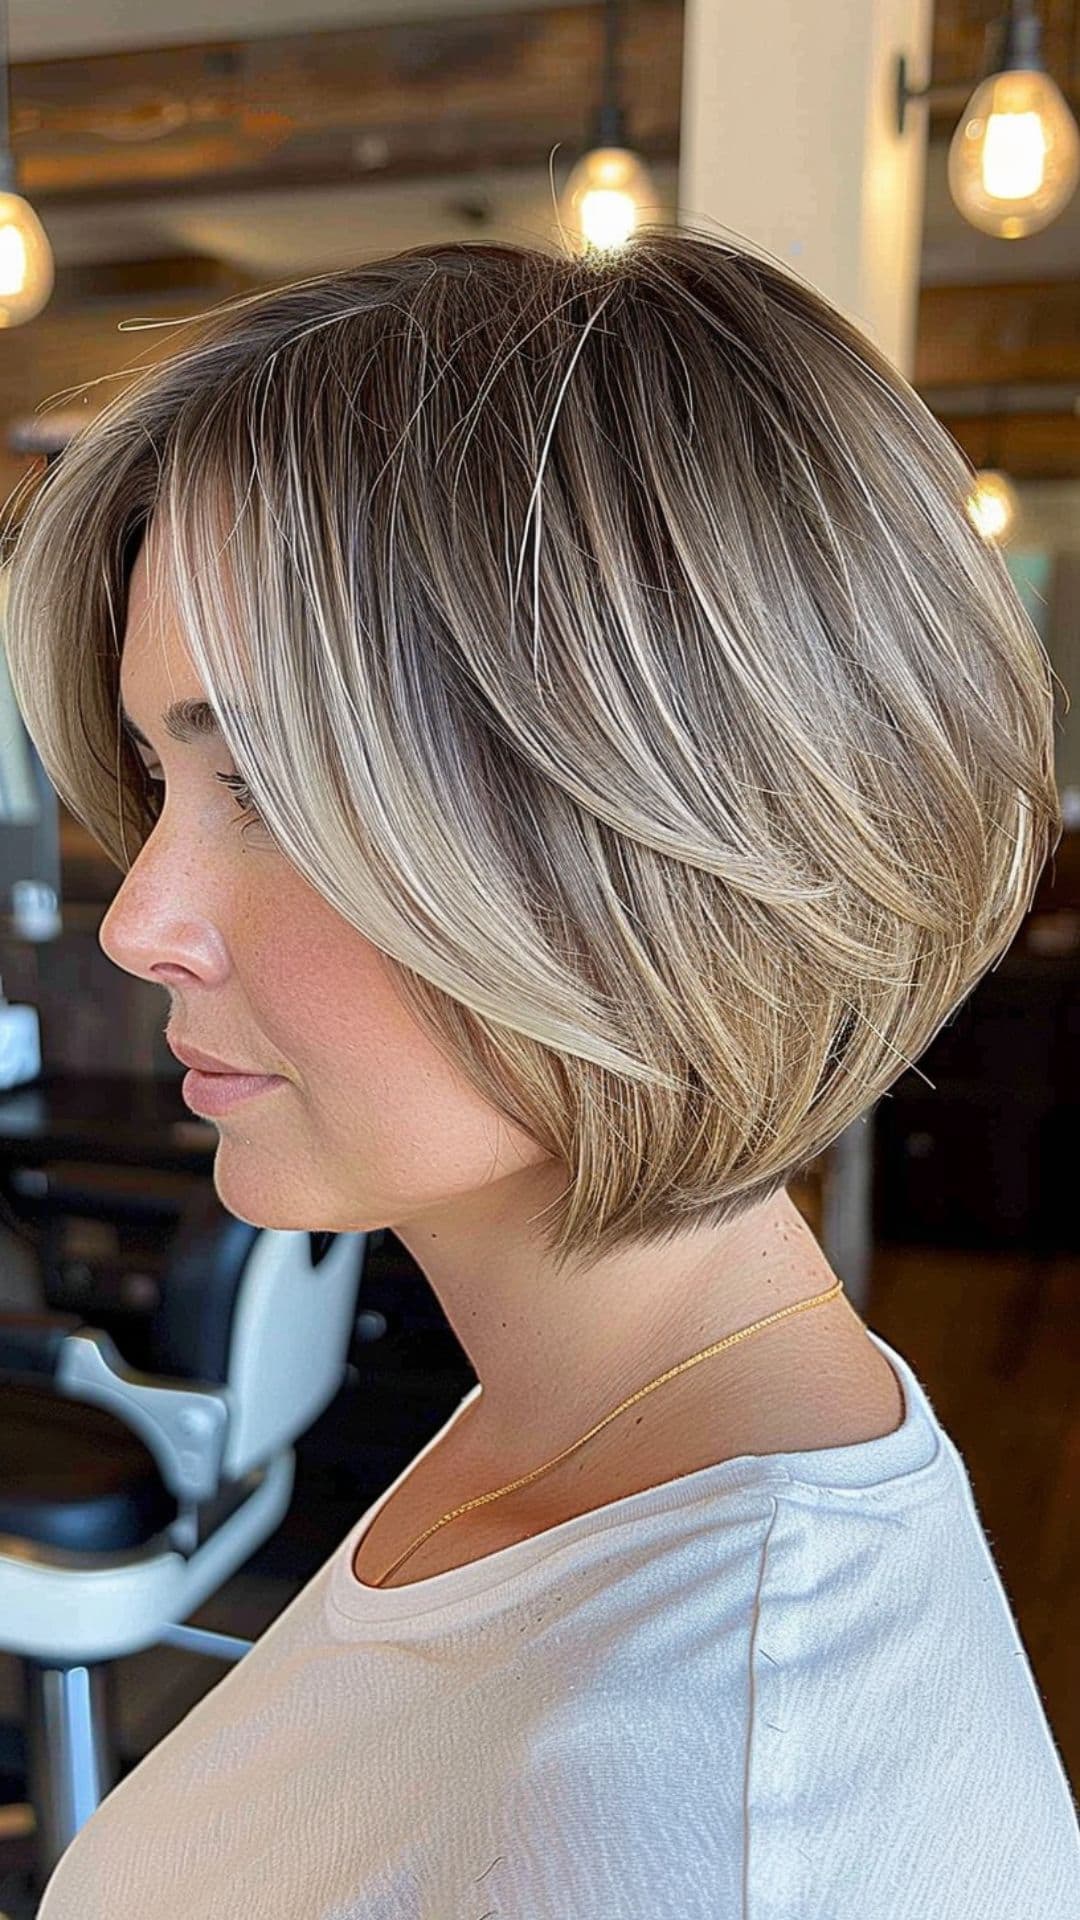 A woman modelling a stacked bob with layers haircut.